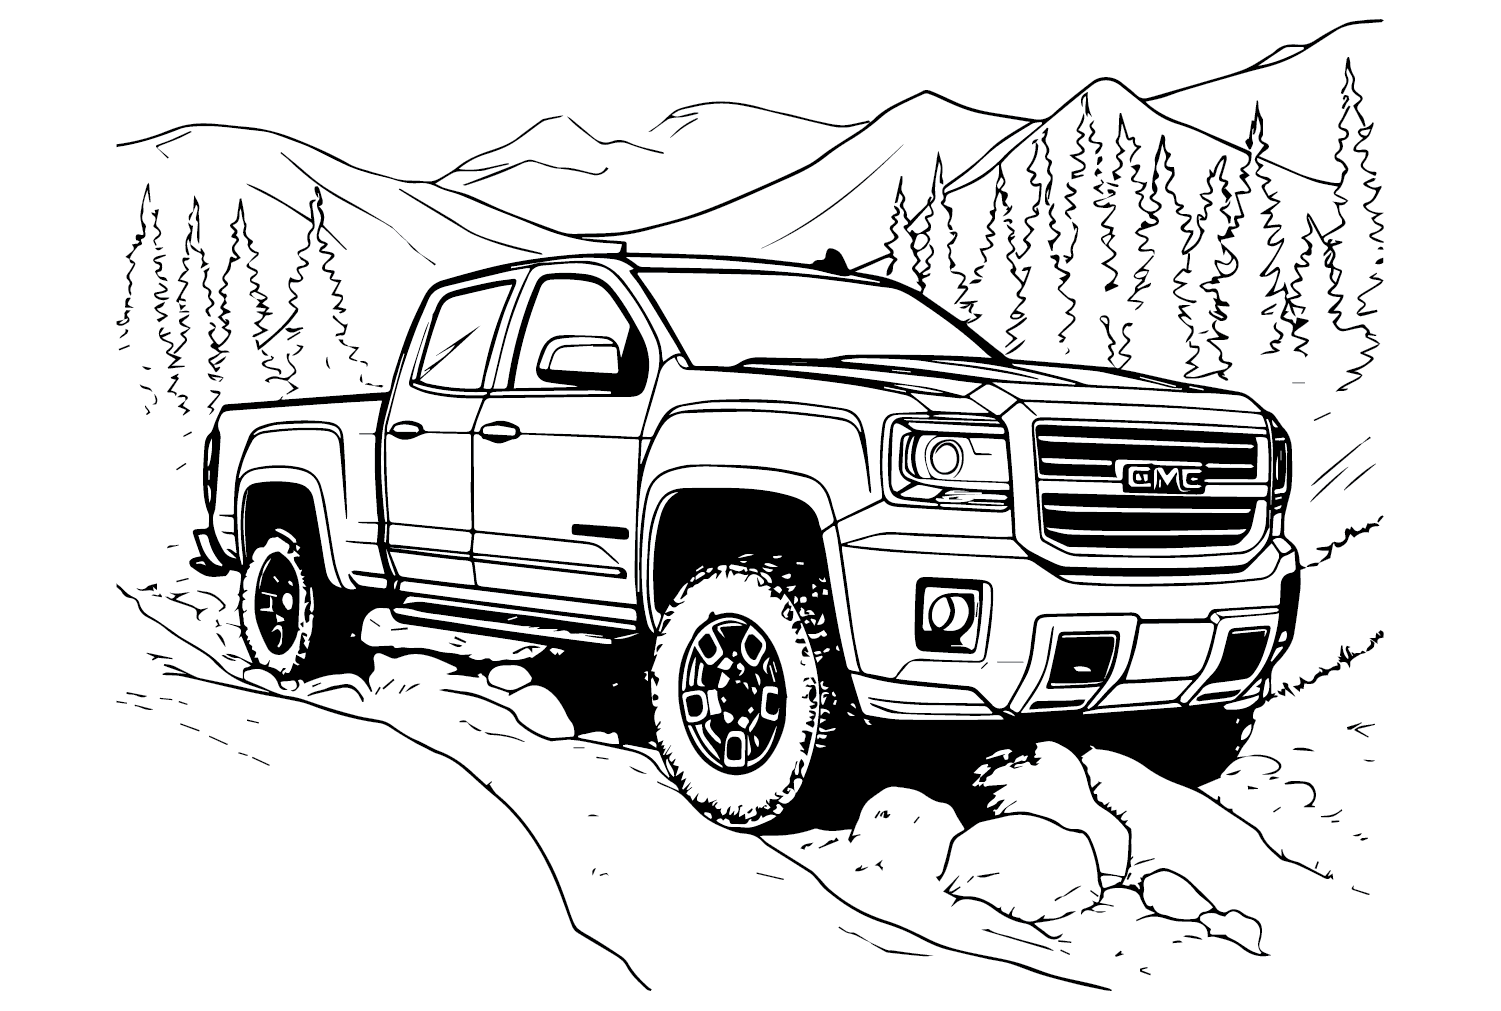 Gmc coloring pages